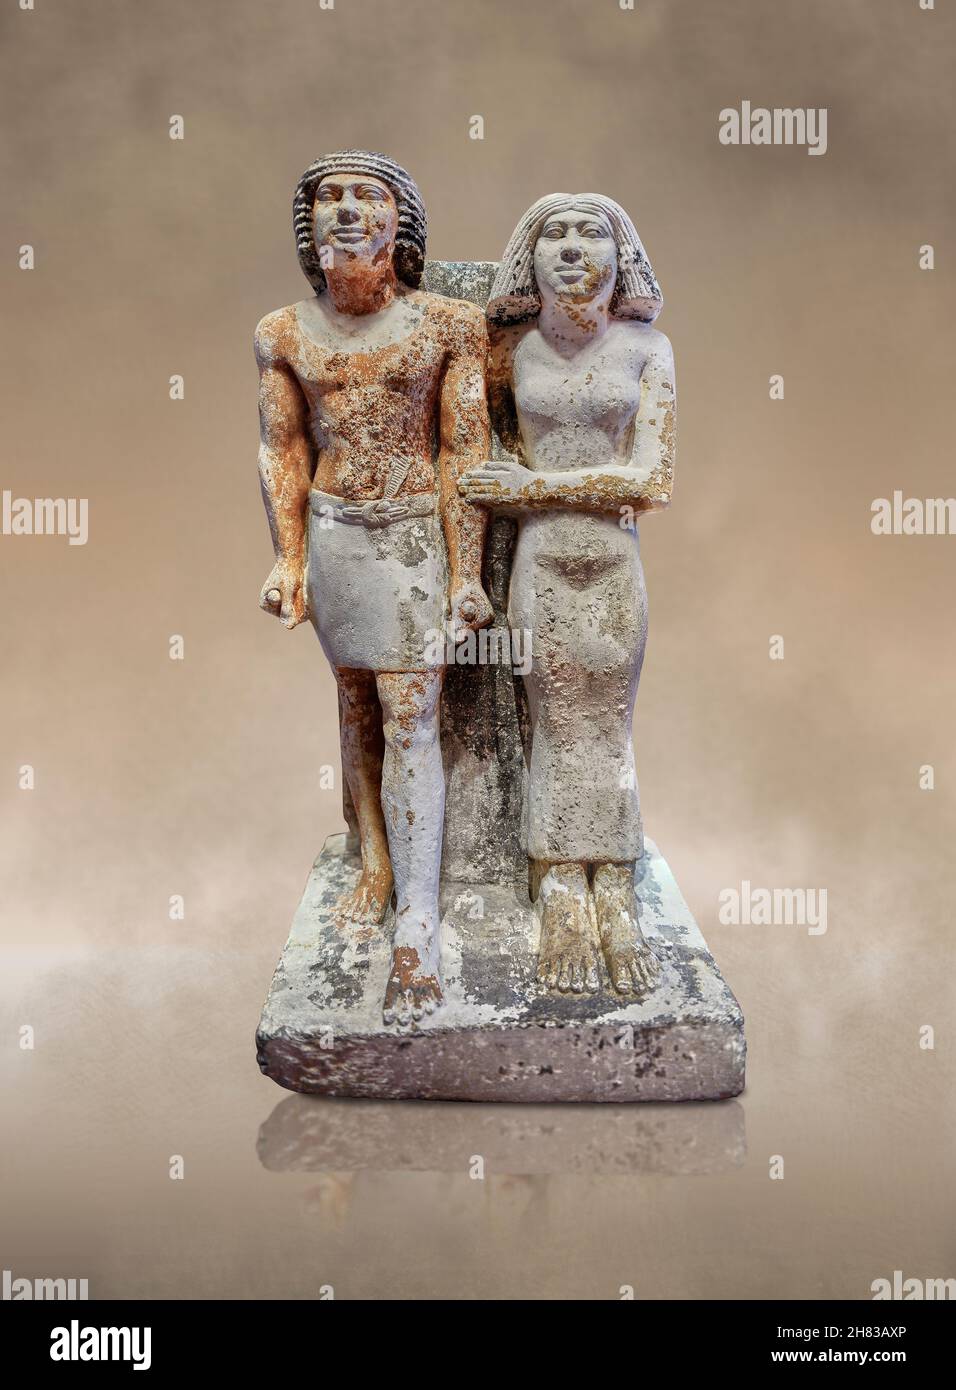 Ancient Ggyptian statue of Kai-pu-ptah and Ipep, 2400 BC, 5th Dynasty, Giza necropolis. Kunsthistorisches Muesum Vienna inv AS 7444. Limestone height Stock Photo